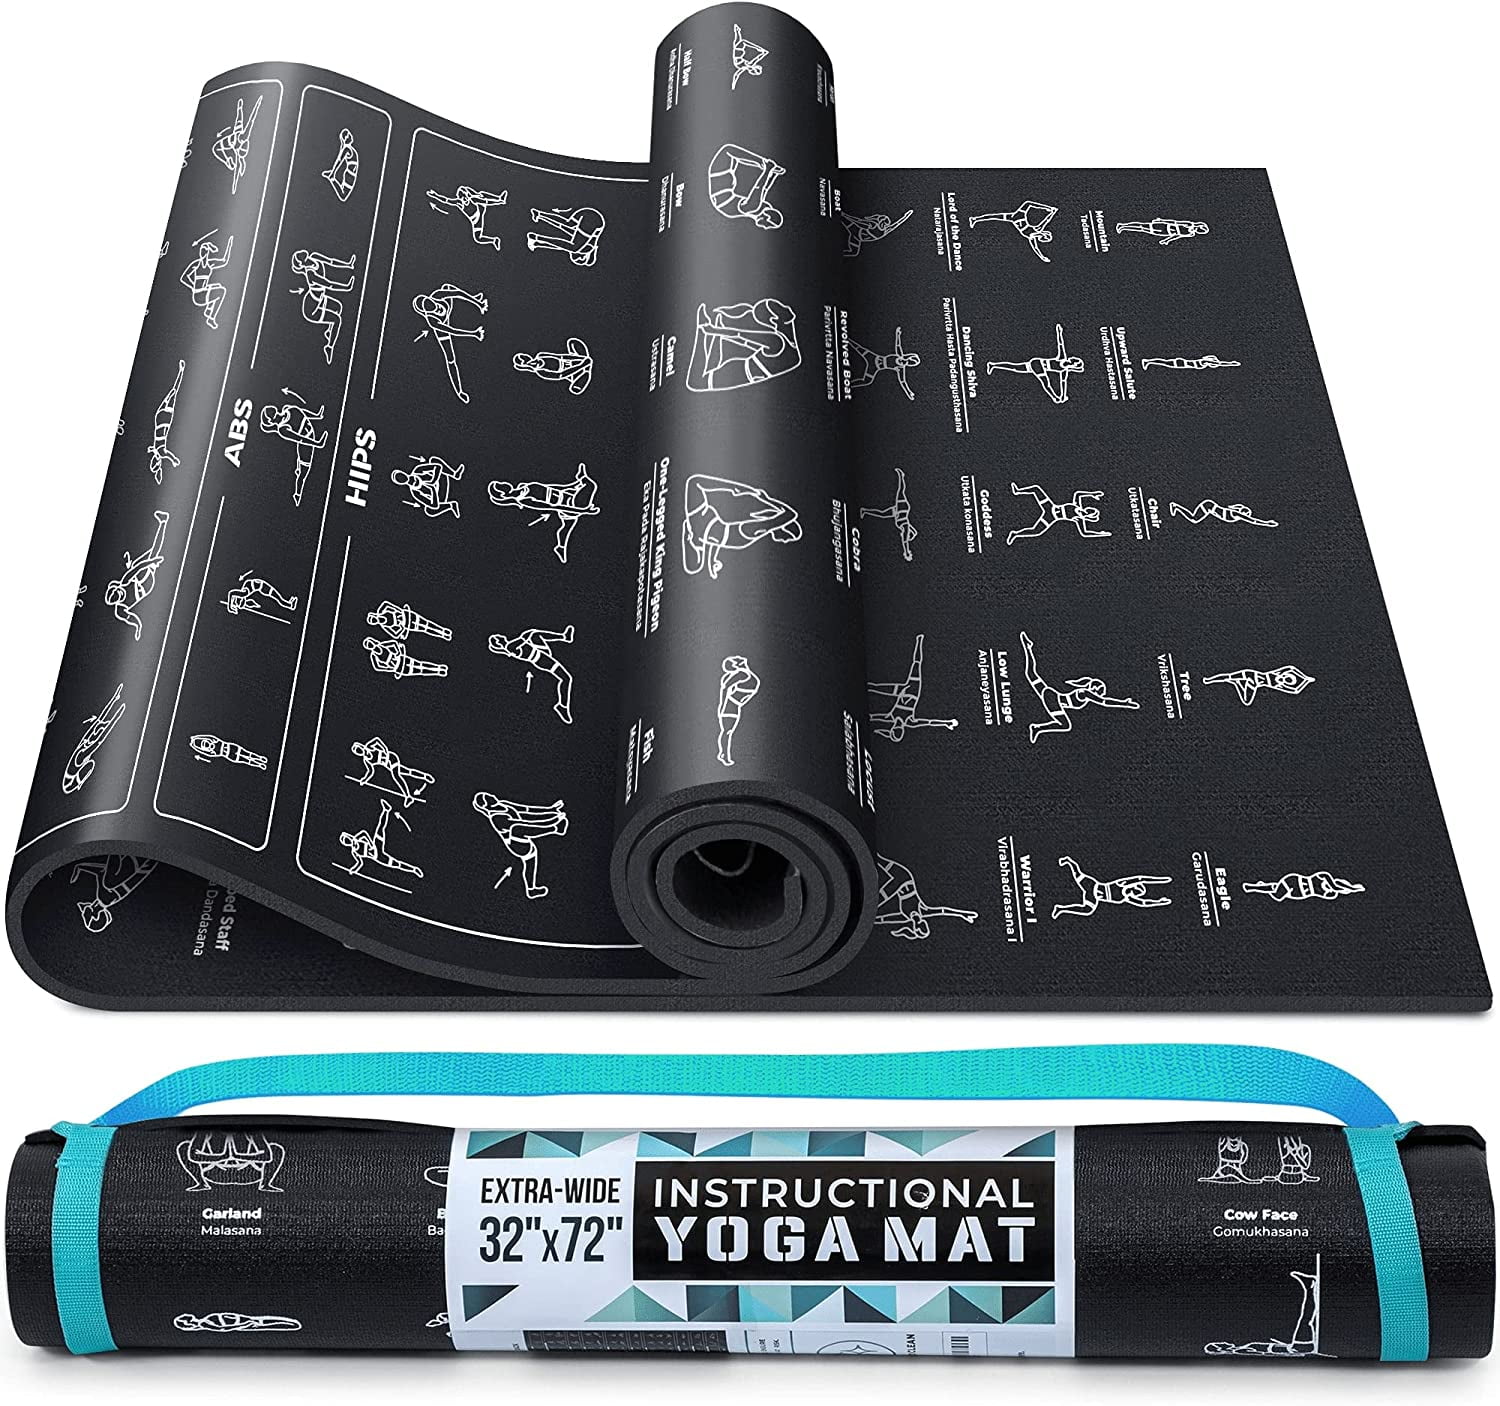  Timgle 2 Pcs Non Slip Yoga Mat with Poses Printed 1/4 Thick  Workout Exercise Mats 70 Illustrated Instructional Yoga Gift for Women Men  Beginners Gym Pilates Home Stretching Fitness Essentials 